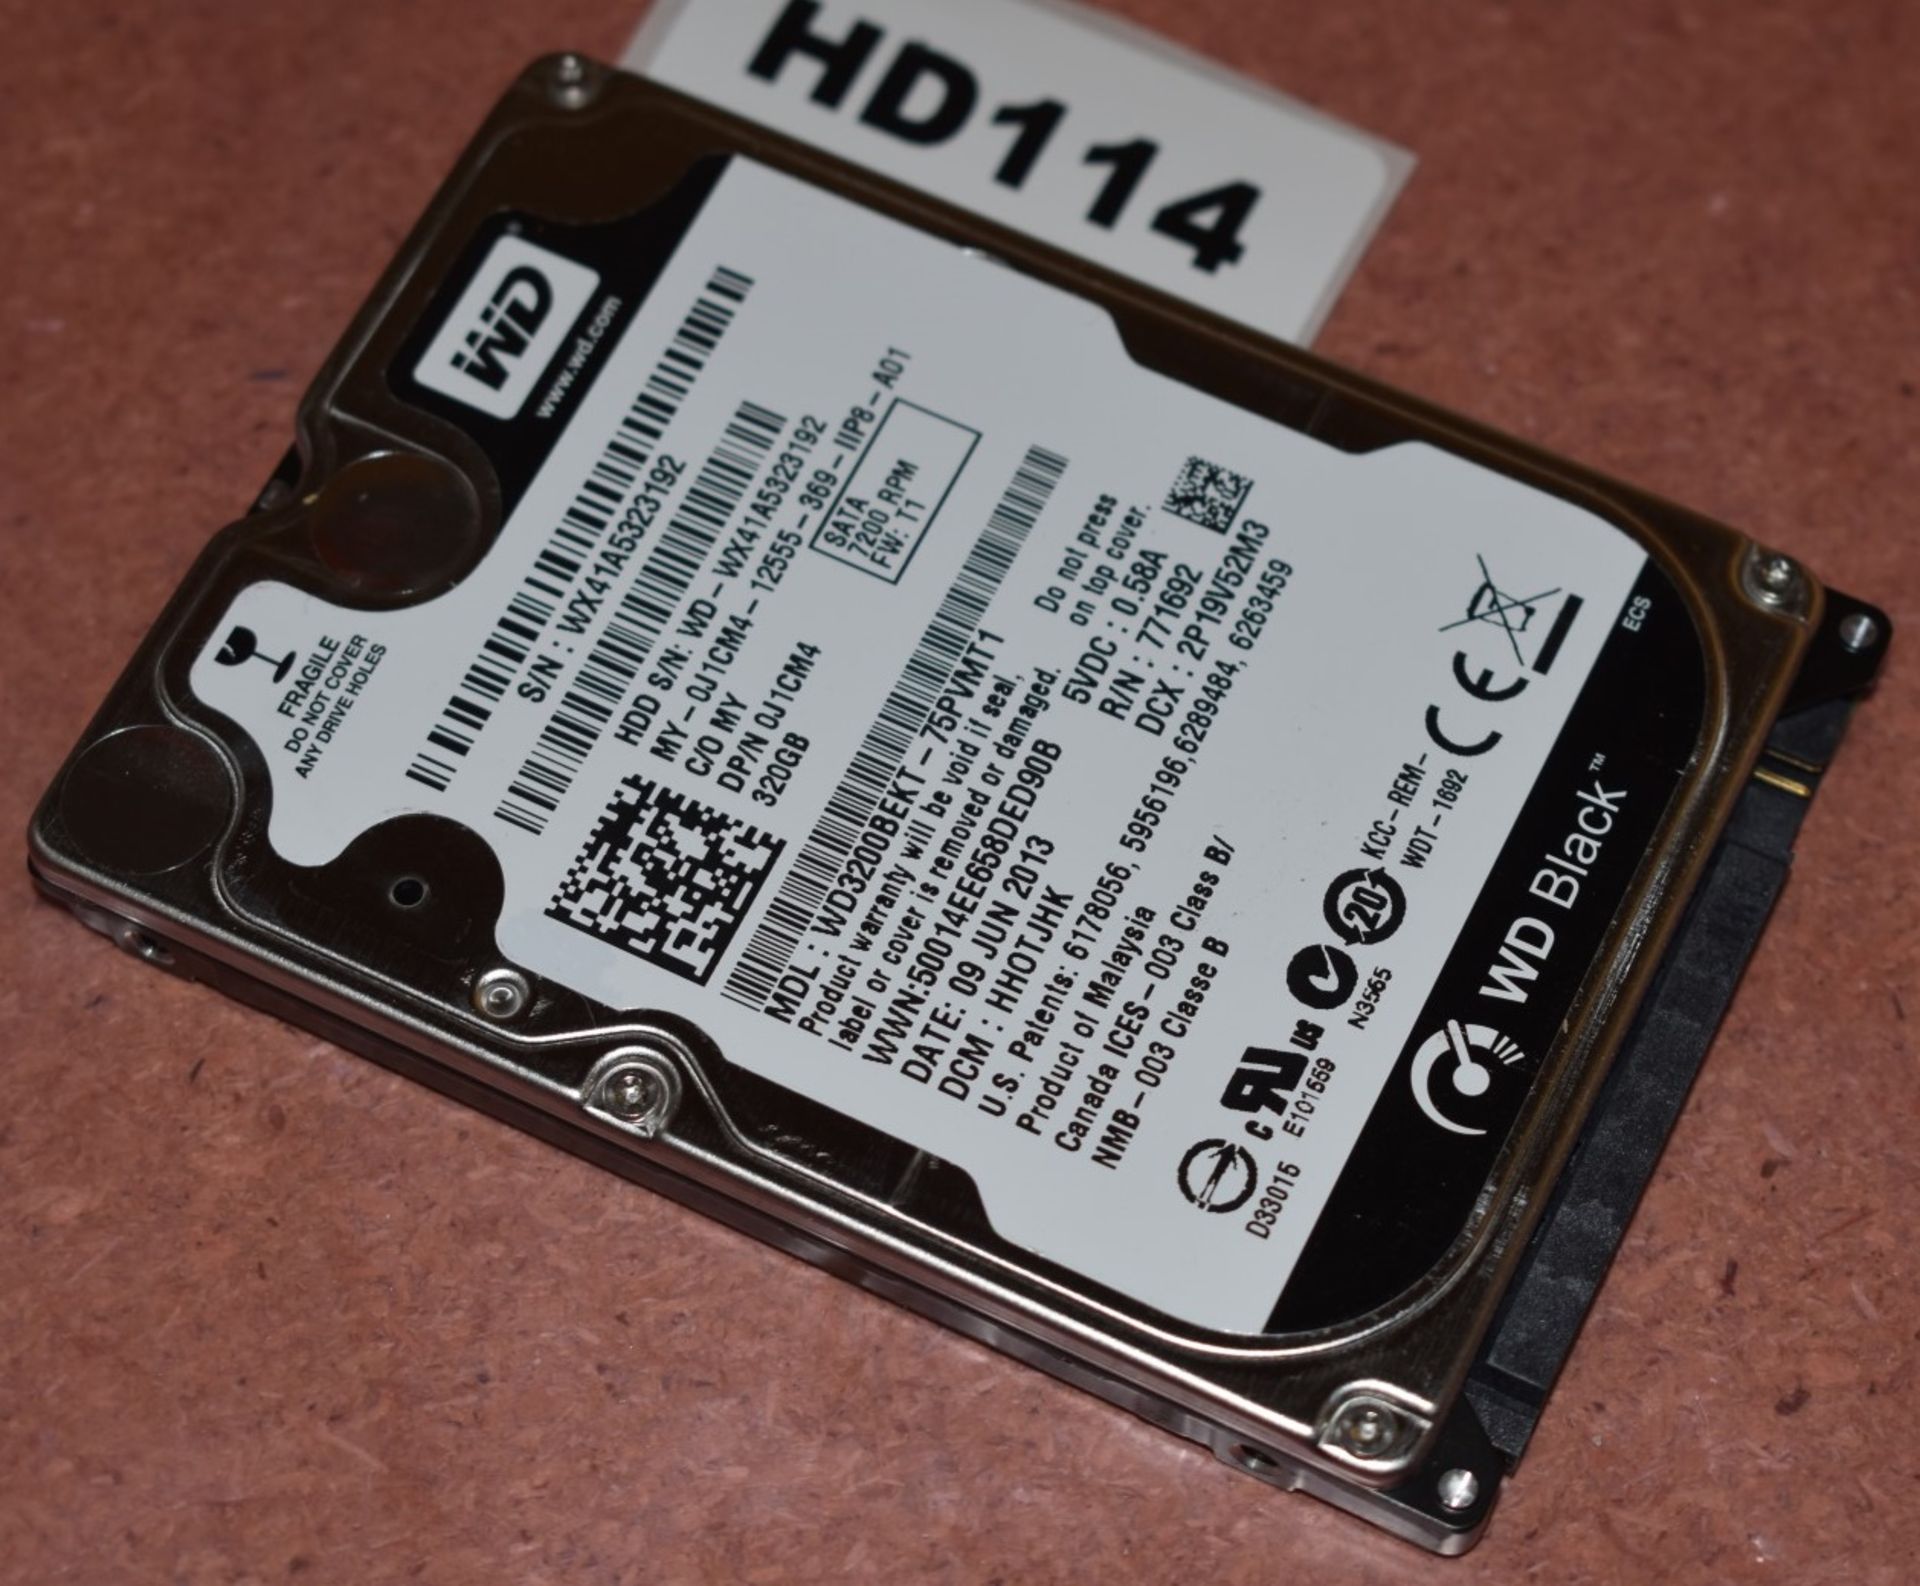 4 x Western Digital 320gb Black 2.5 Inch SATA Hard Drives - Tested and Formatted - HD113/114/118/124 - Image 2 of 4